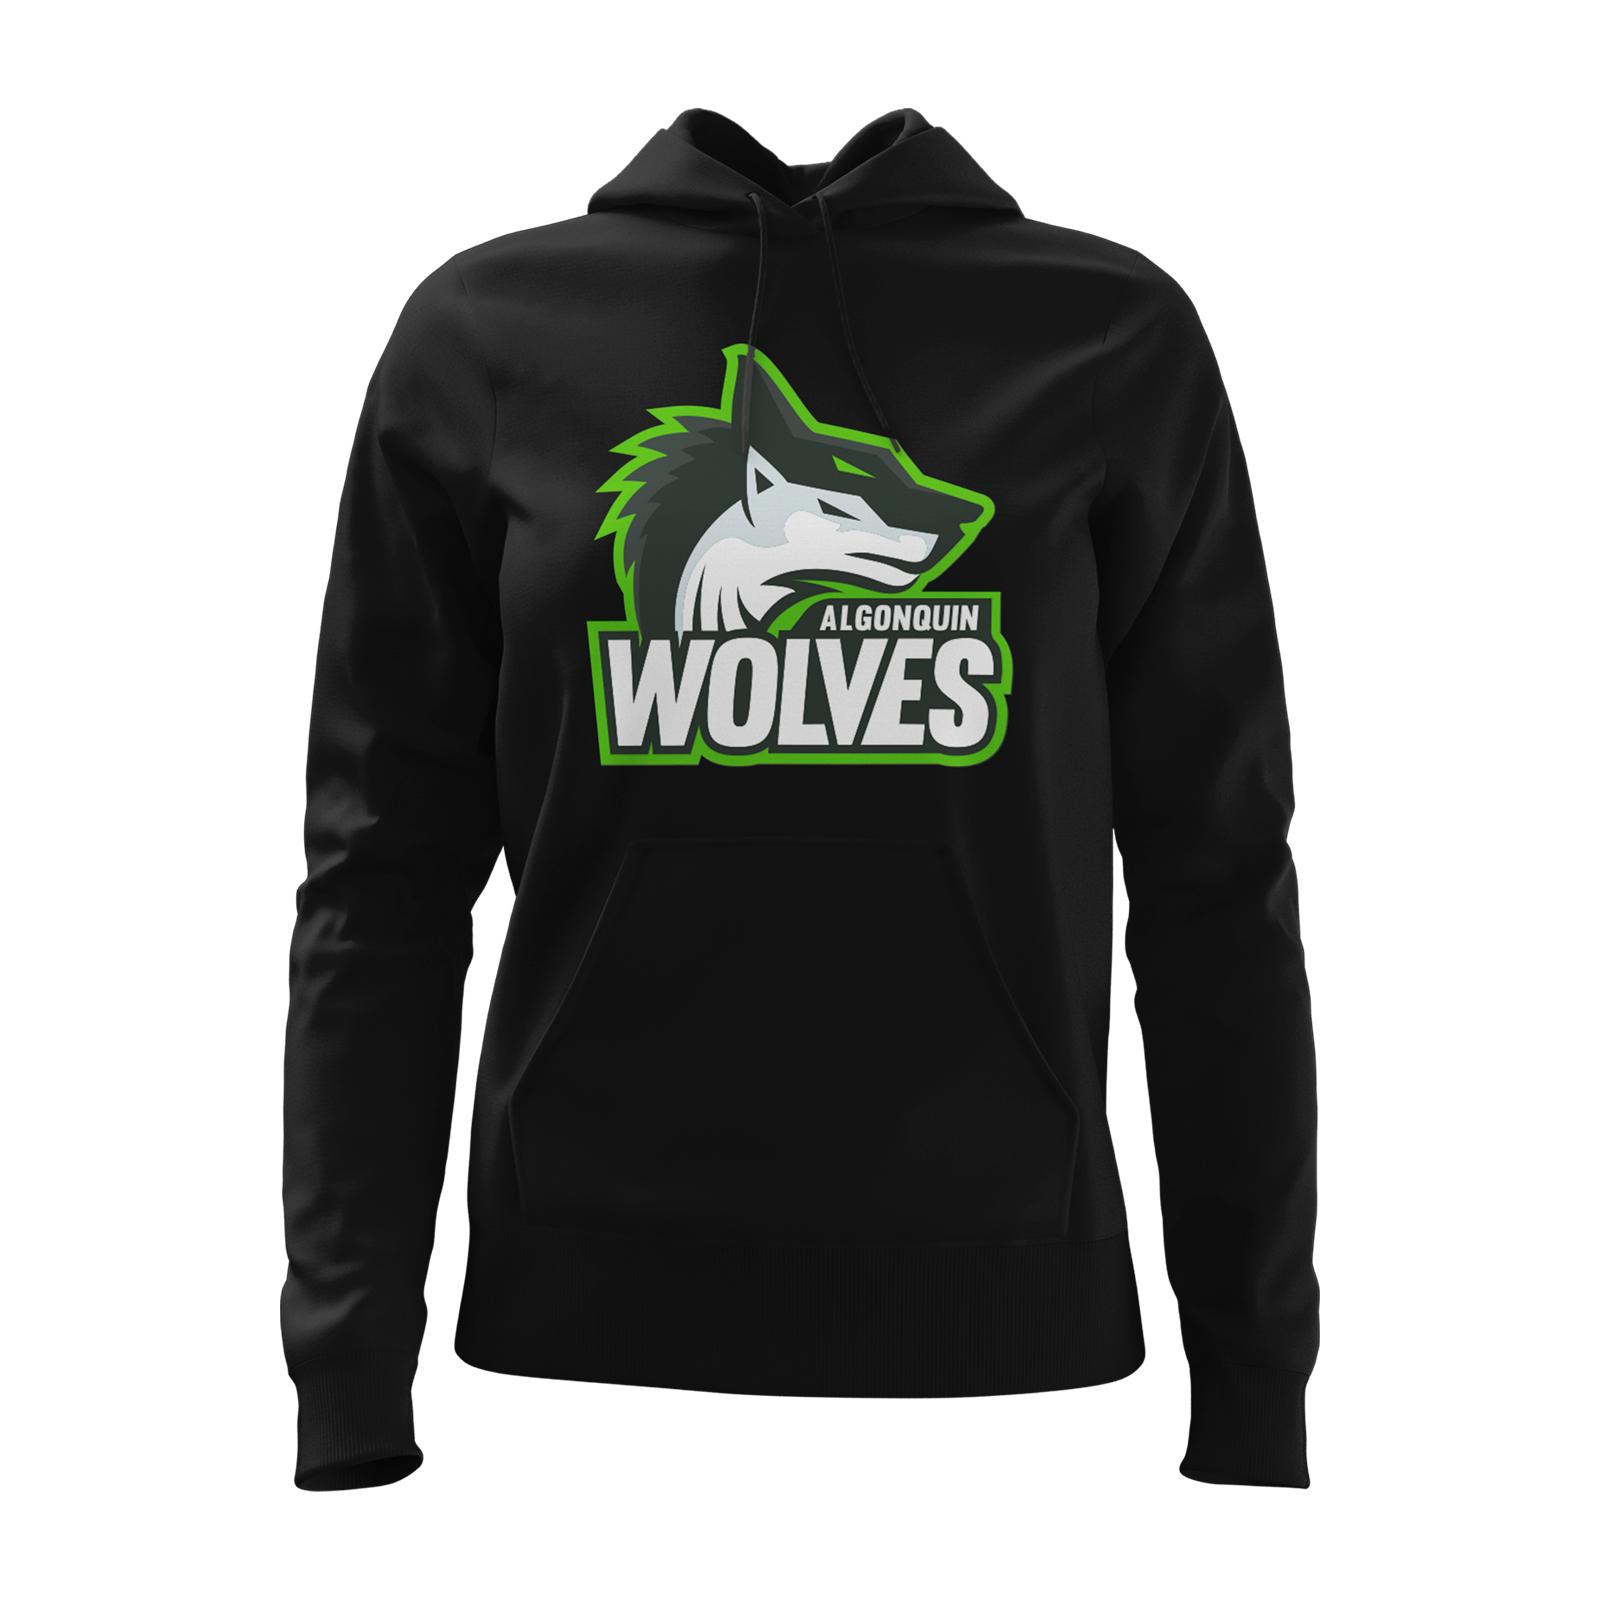 Champion Wolves Hoodie